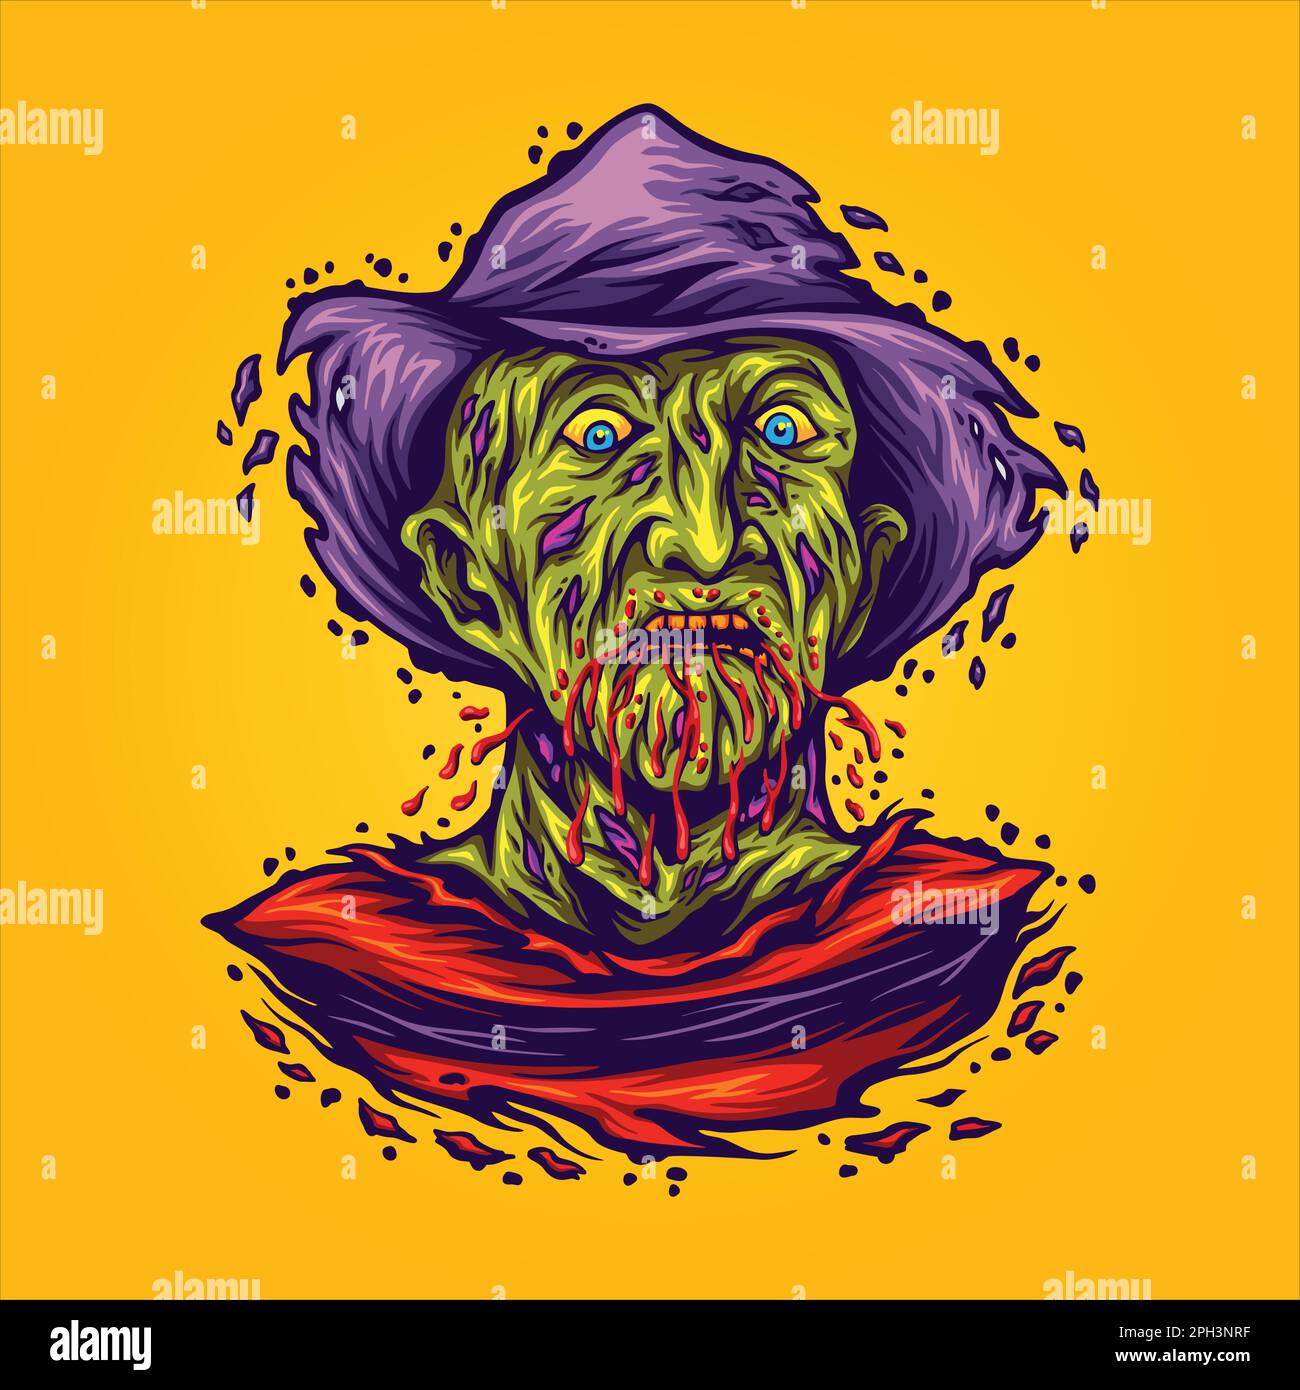 Scary monster zombie krueger face bloody melted logo cartoon illustrations vector for your work logo, merchandise t-shirt, stickers and label designs, Stock Vector